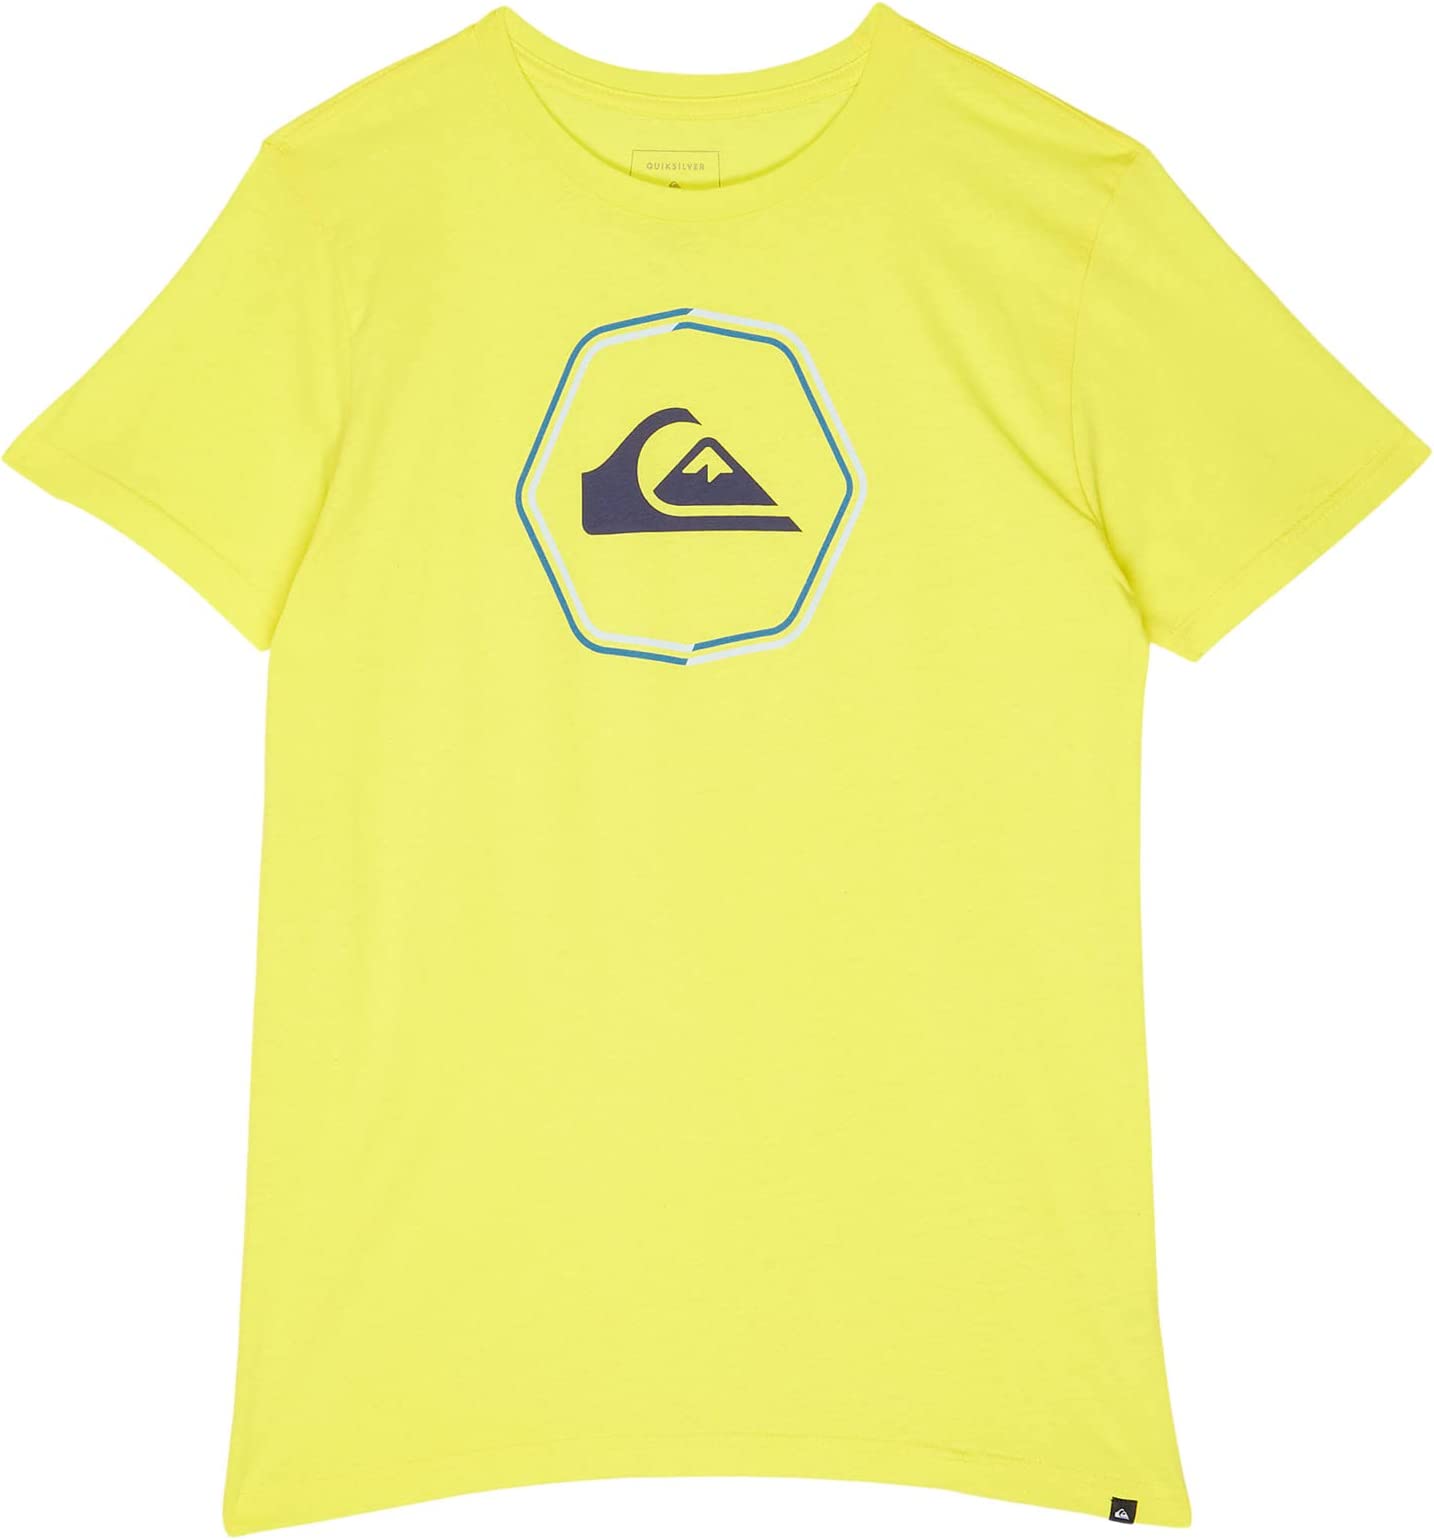 sale Kids Lines Quiksilver | Delivery ○ Tee quiksurfshop.com Kids) Thin (Big Free on